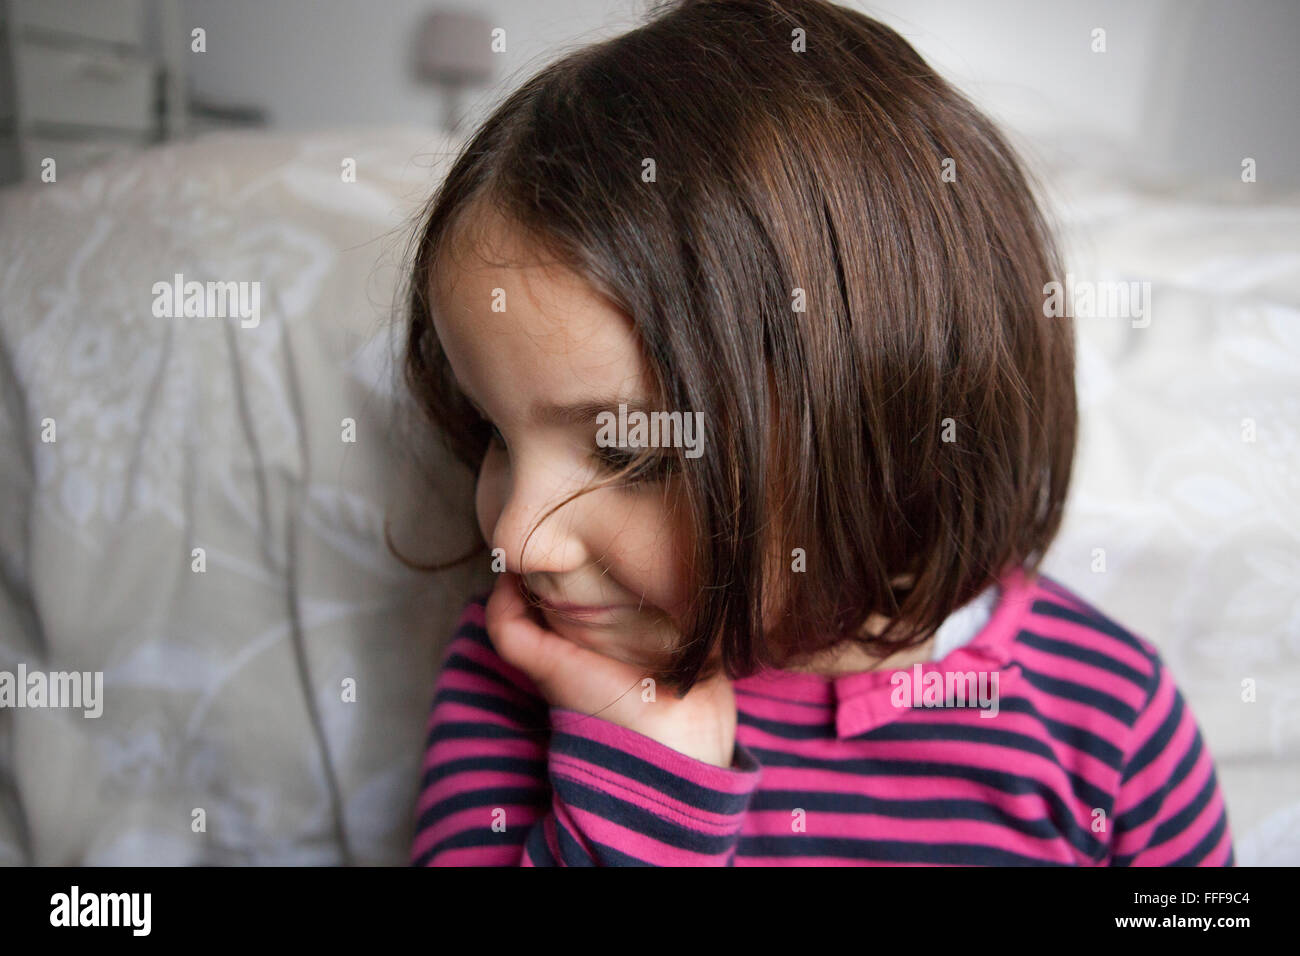 Dreamer three years old little girl. Indoors portrait Stock Photo